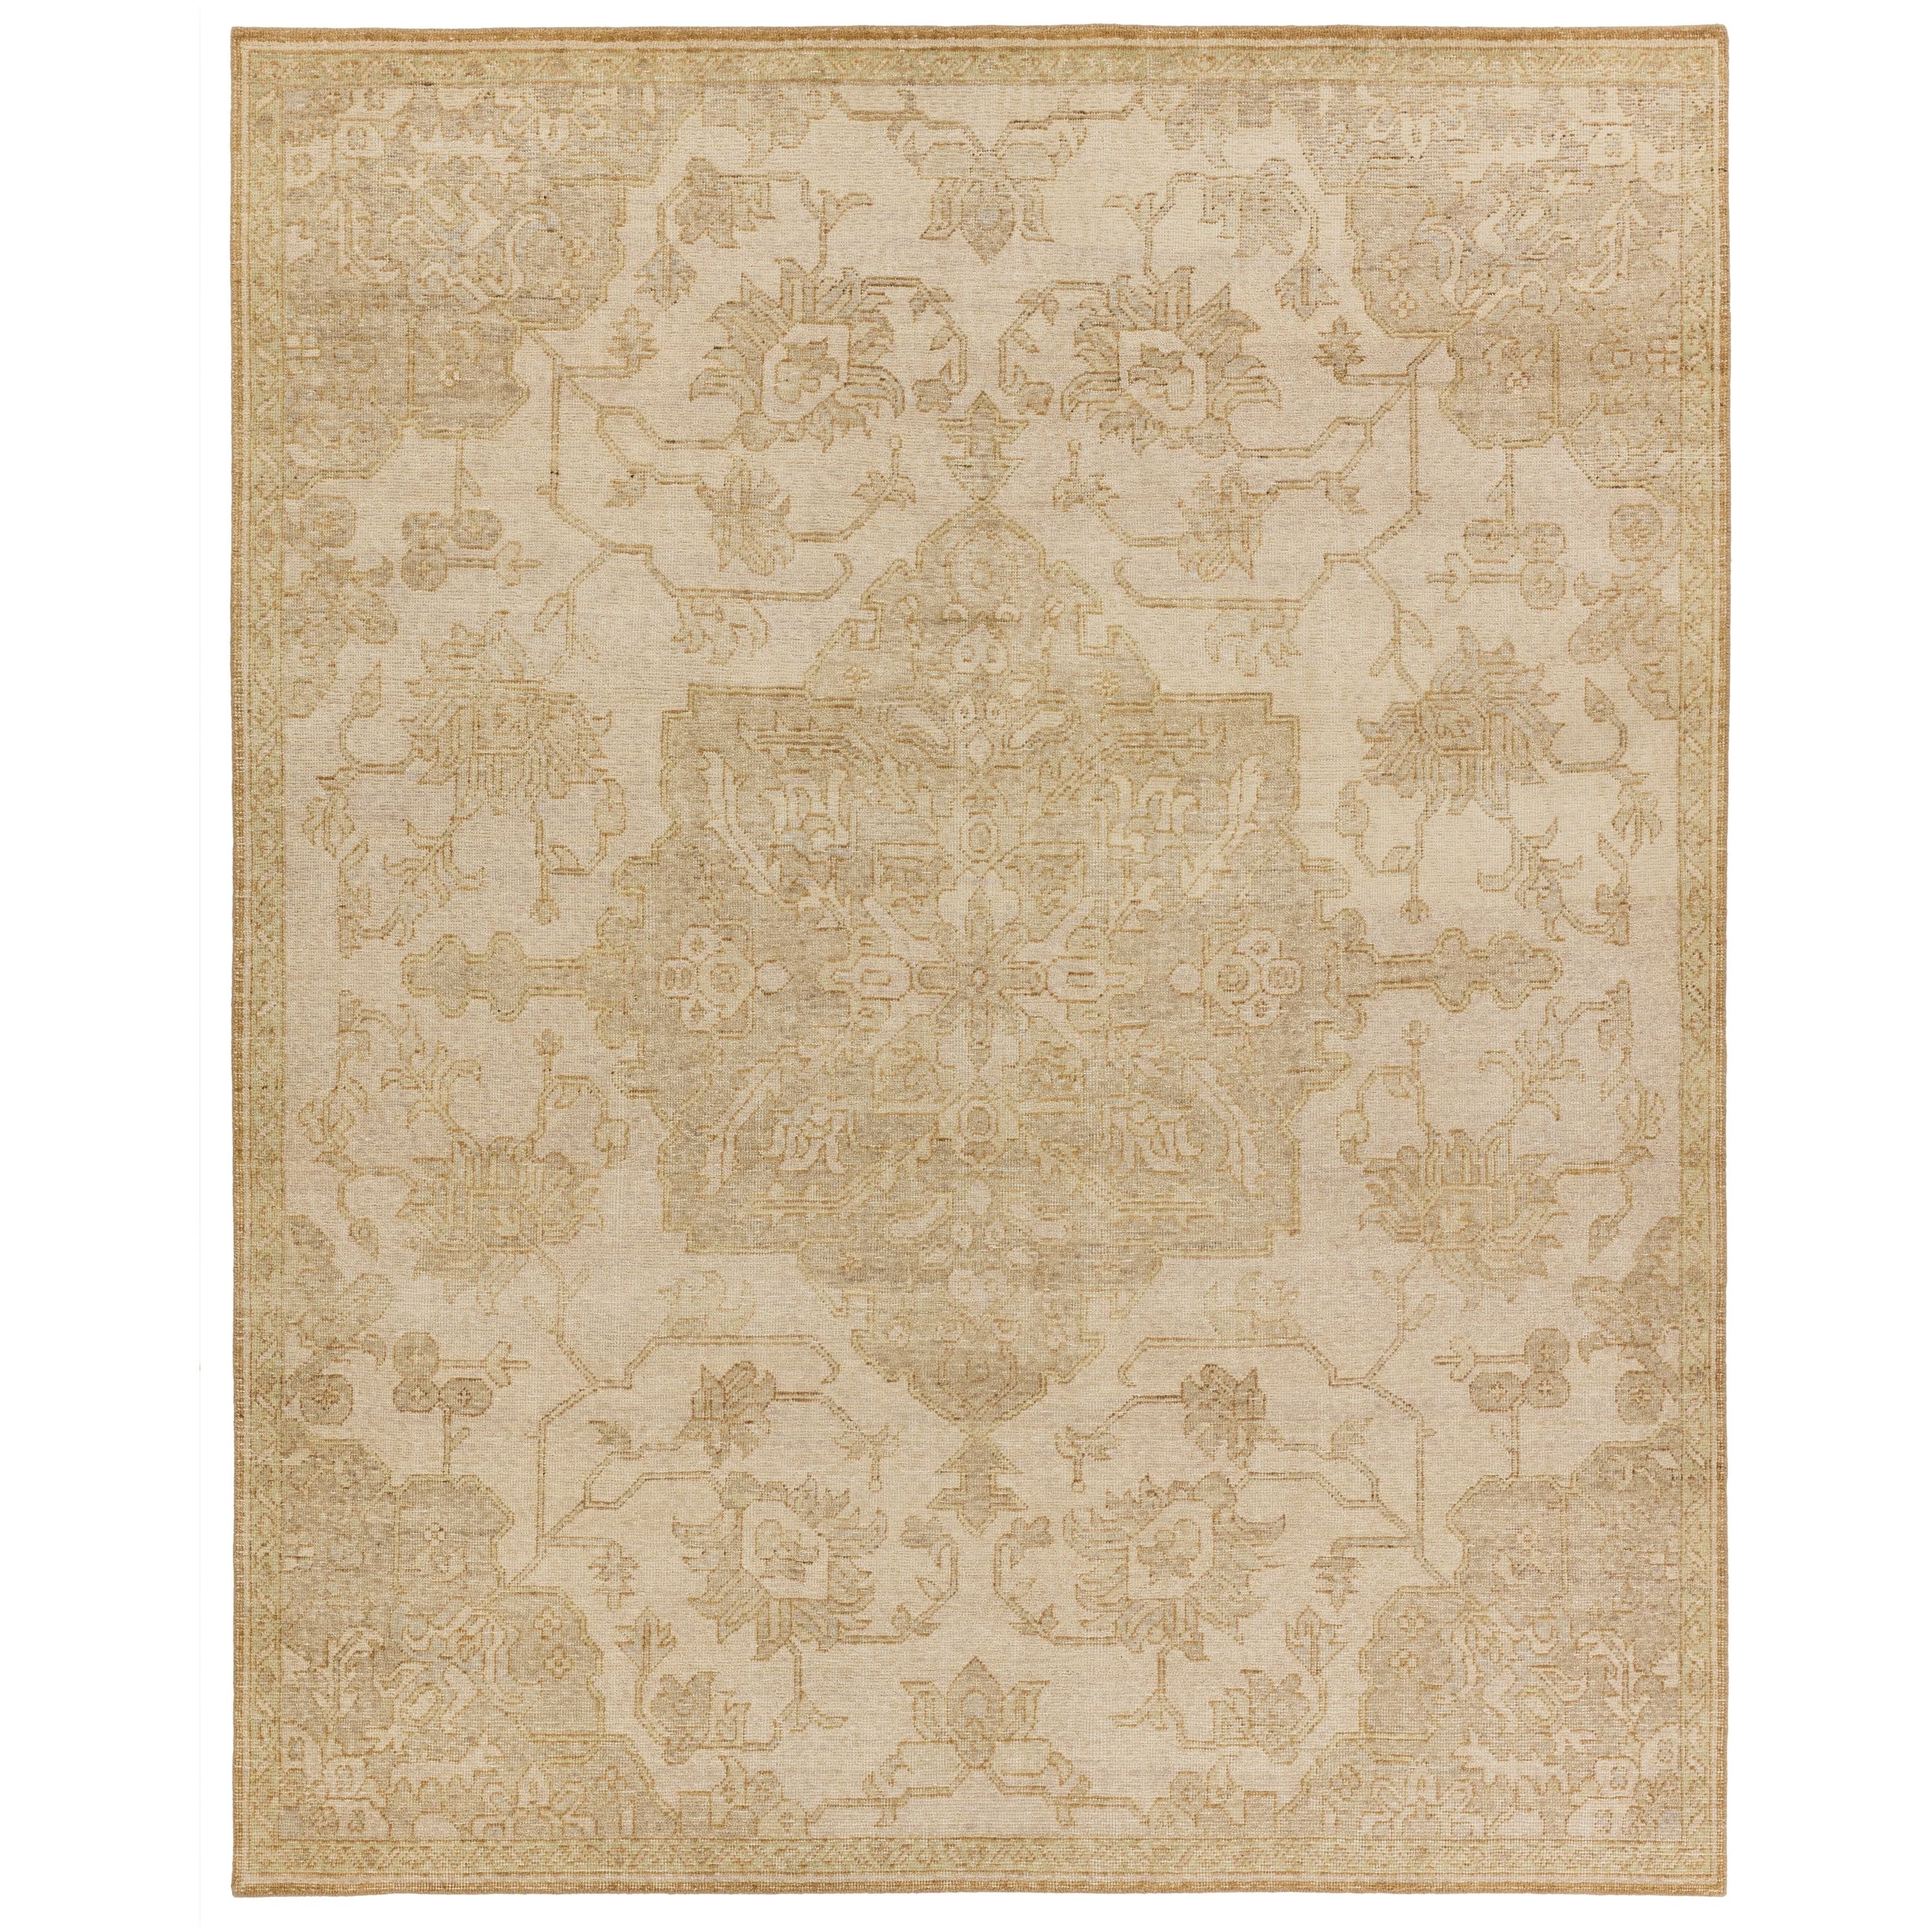 The Onessa collection marries traditional motifs with soft, subdued colorways for the perfect blend of fresh and time-honored style. These hand-knotted wool rugs feature a hand-sheared quality that lends the design a coveted vintage impression. The Danet rug features a distressed, floral pattern in hues of tan, gold, taupe, cream, and hints of green. Amethyst Home provides interior design, new construction, custom furniture, and area rugs in the Washington metro area.